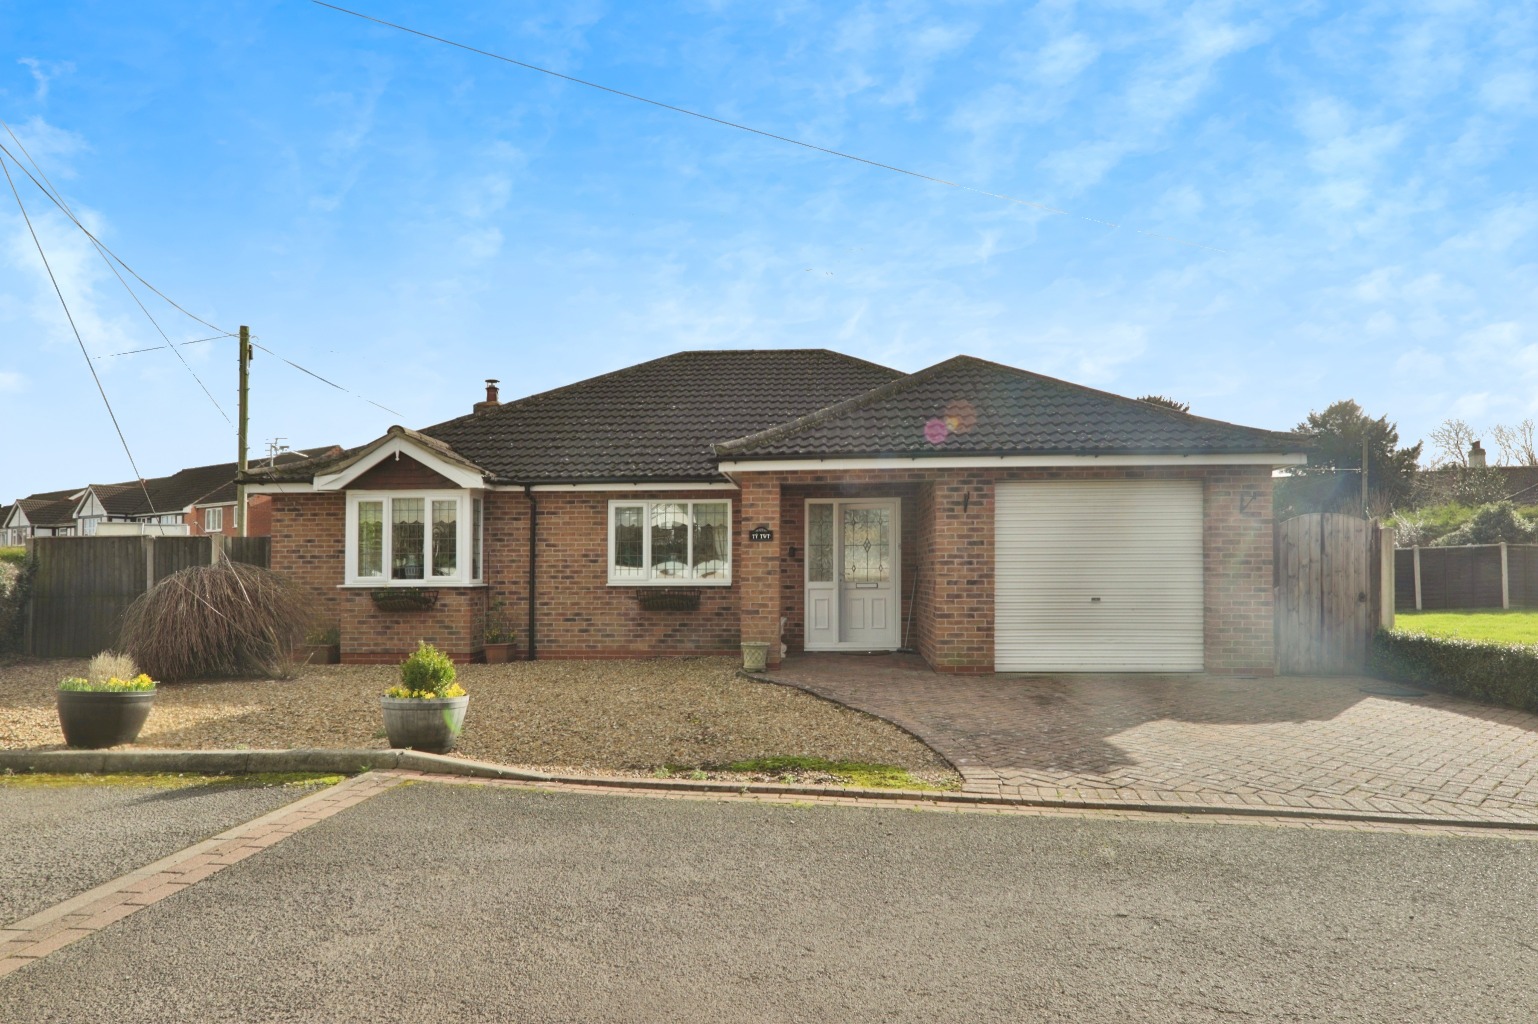 2 bed detached bungalow for sale in Mount Royale Close, Ulceby - Property Image 1